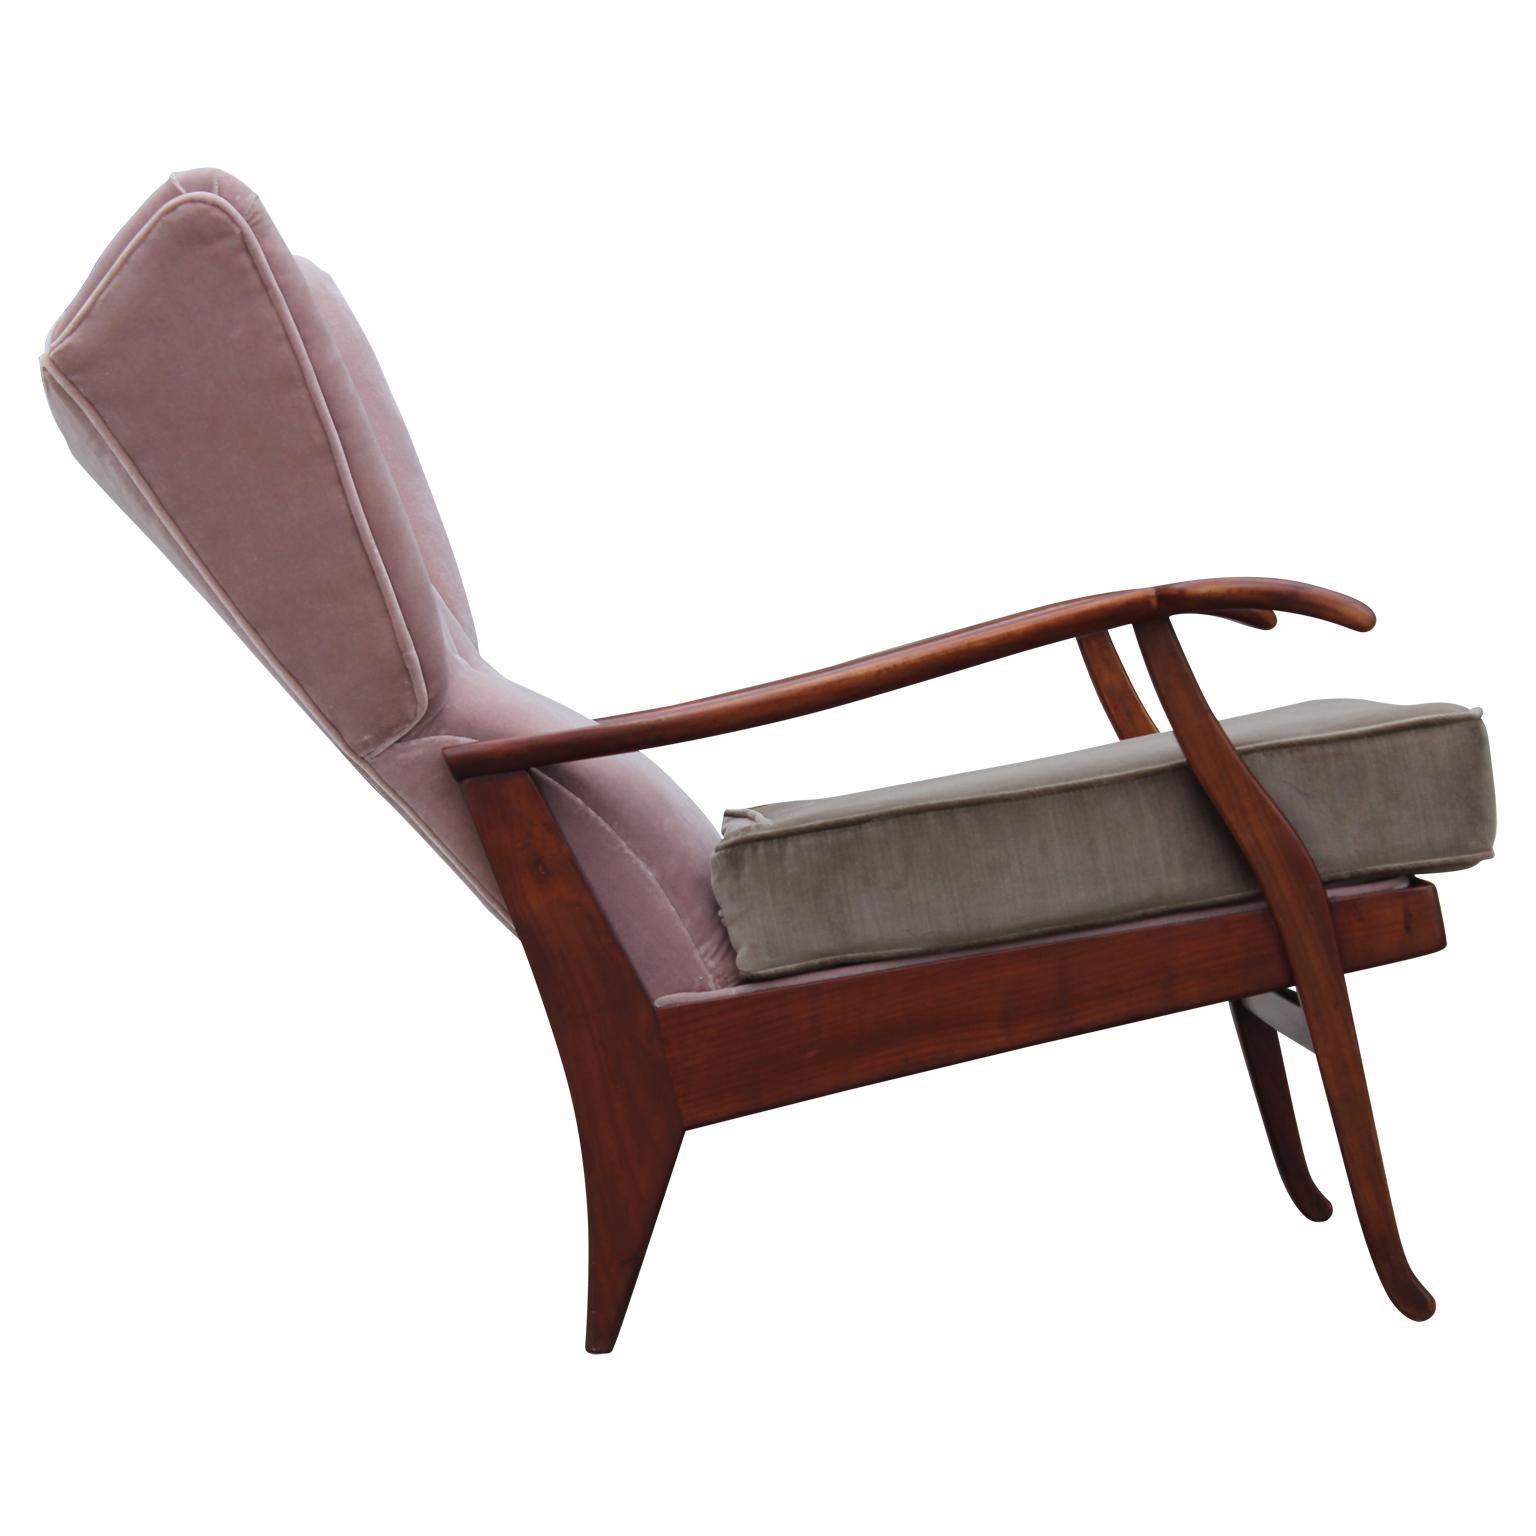 Mid-20th Century Pair of Modern Pink & Taupe Italian Wingback Reclining Chairs Paolo Buffa Style